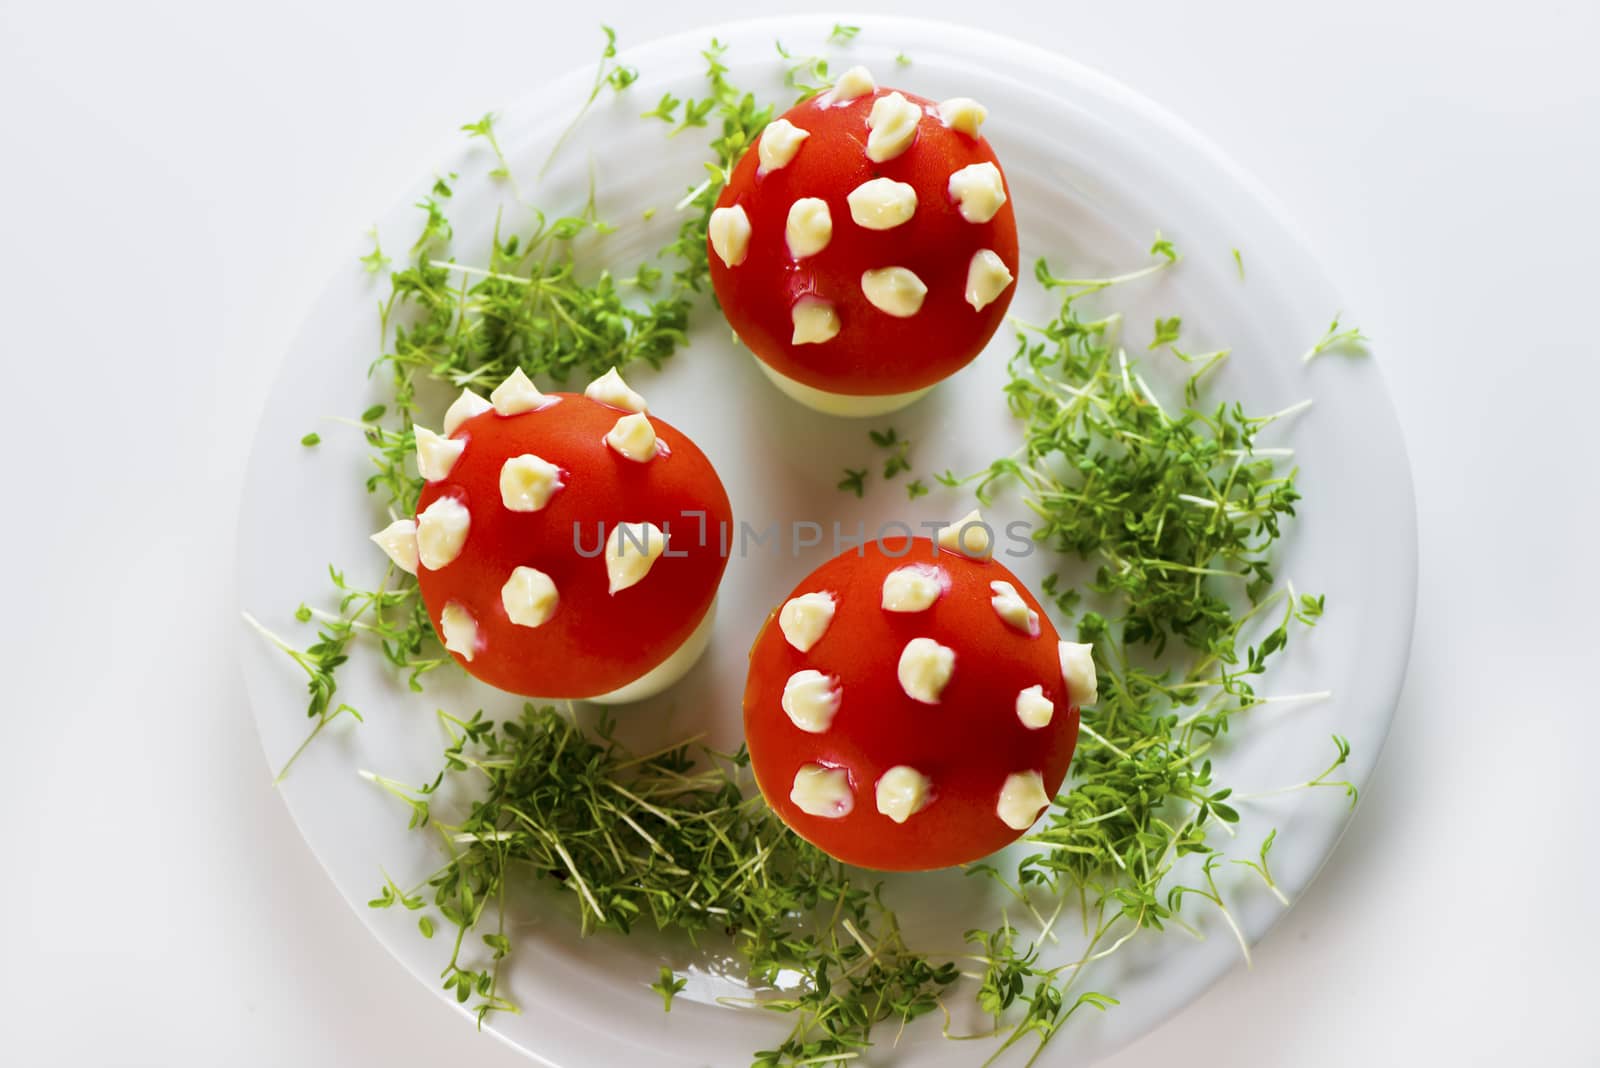 Fly mushroom formed from boiled egg, cover with the tomato mayonnaise. Funny food for children or party.